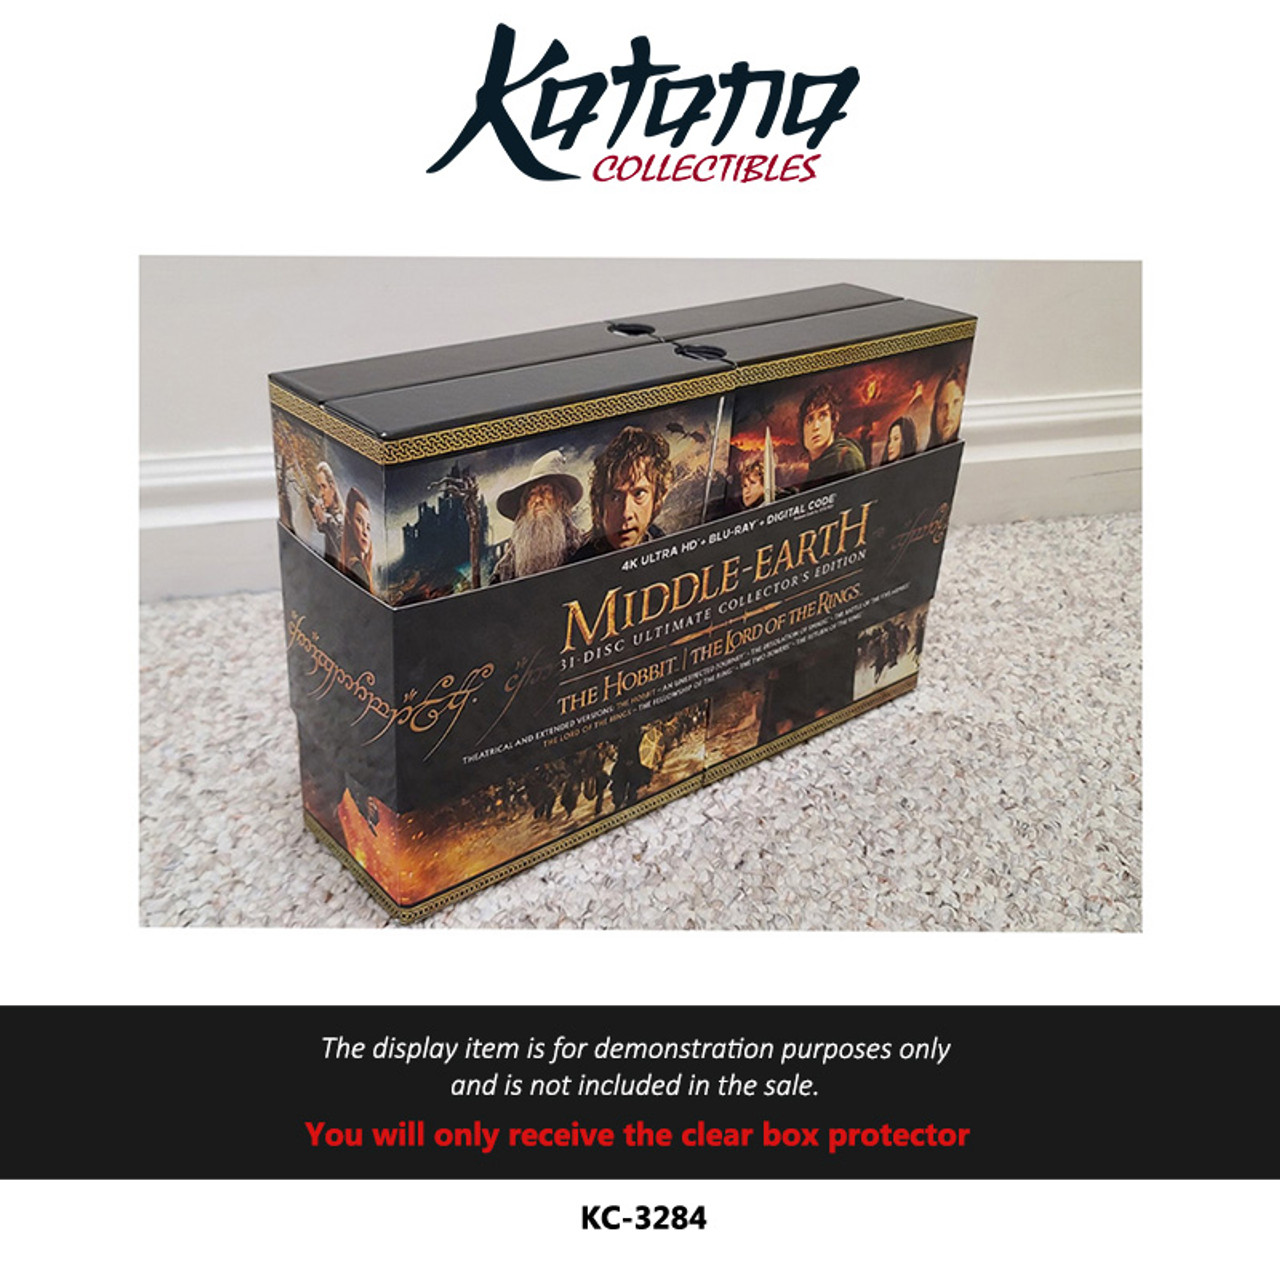 Katana Collectibles Protector For Middle-Earth 31-Disc Ultimate Collector's Edition-1